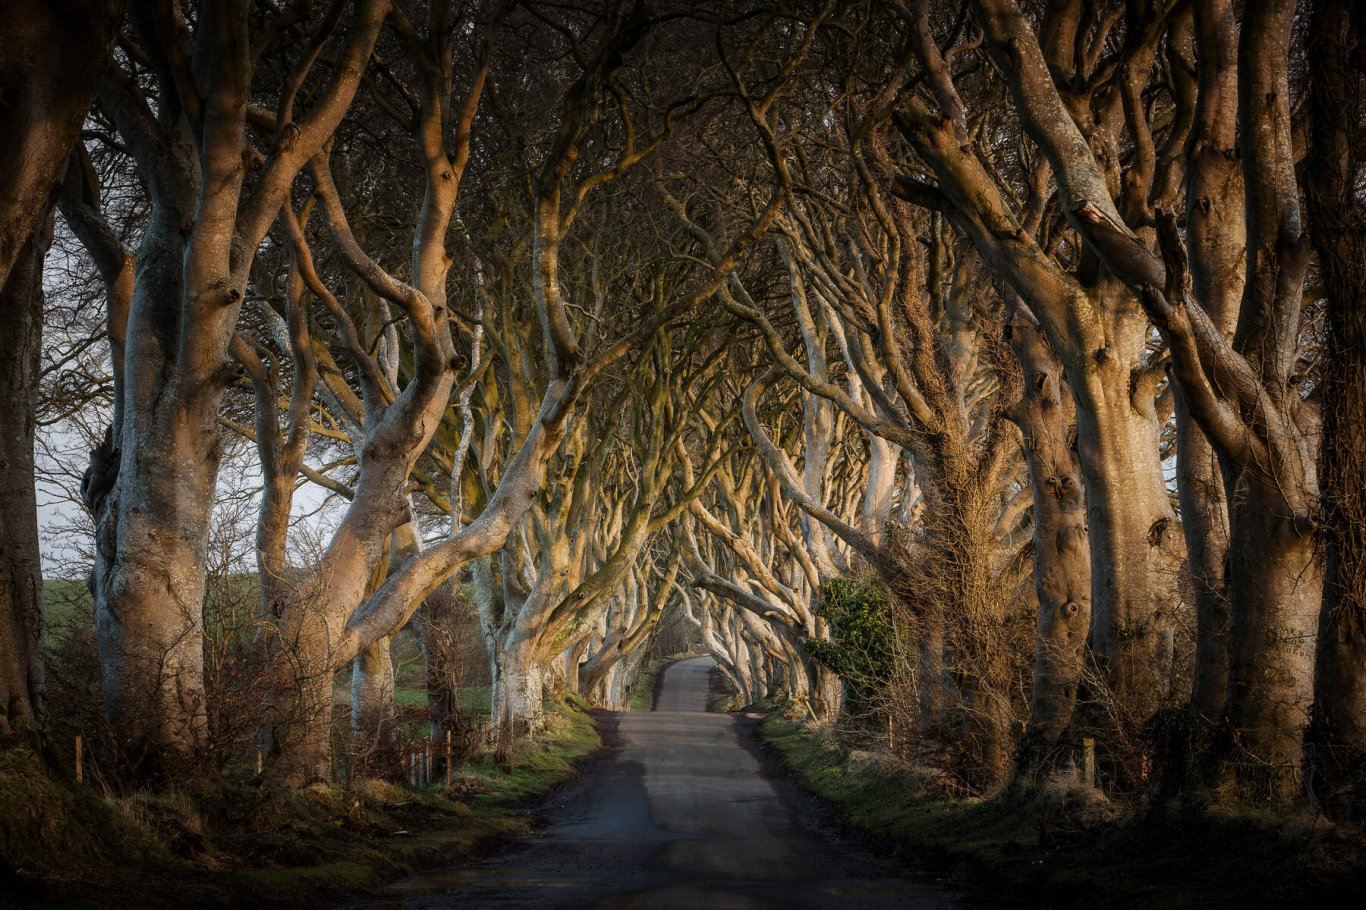 Dark Hedges on Game of Thrones Day Tour